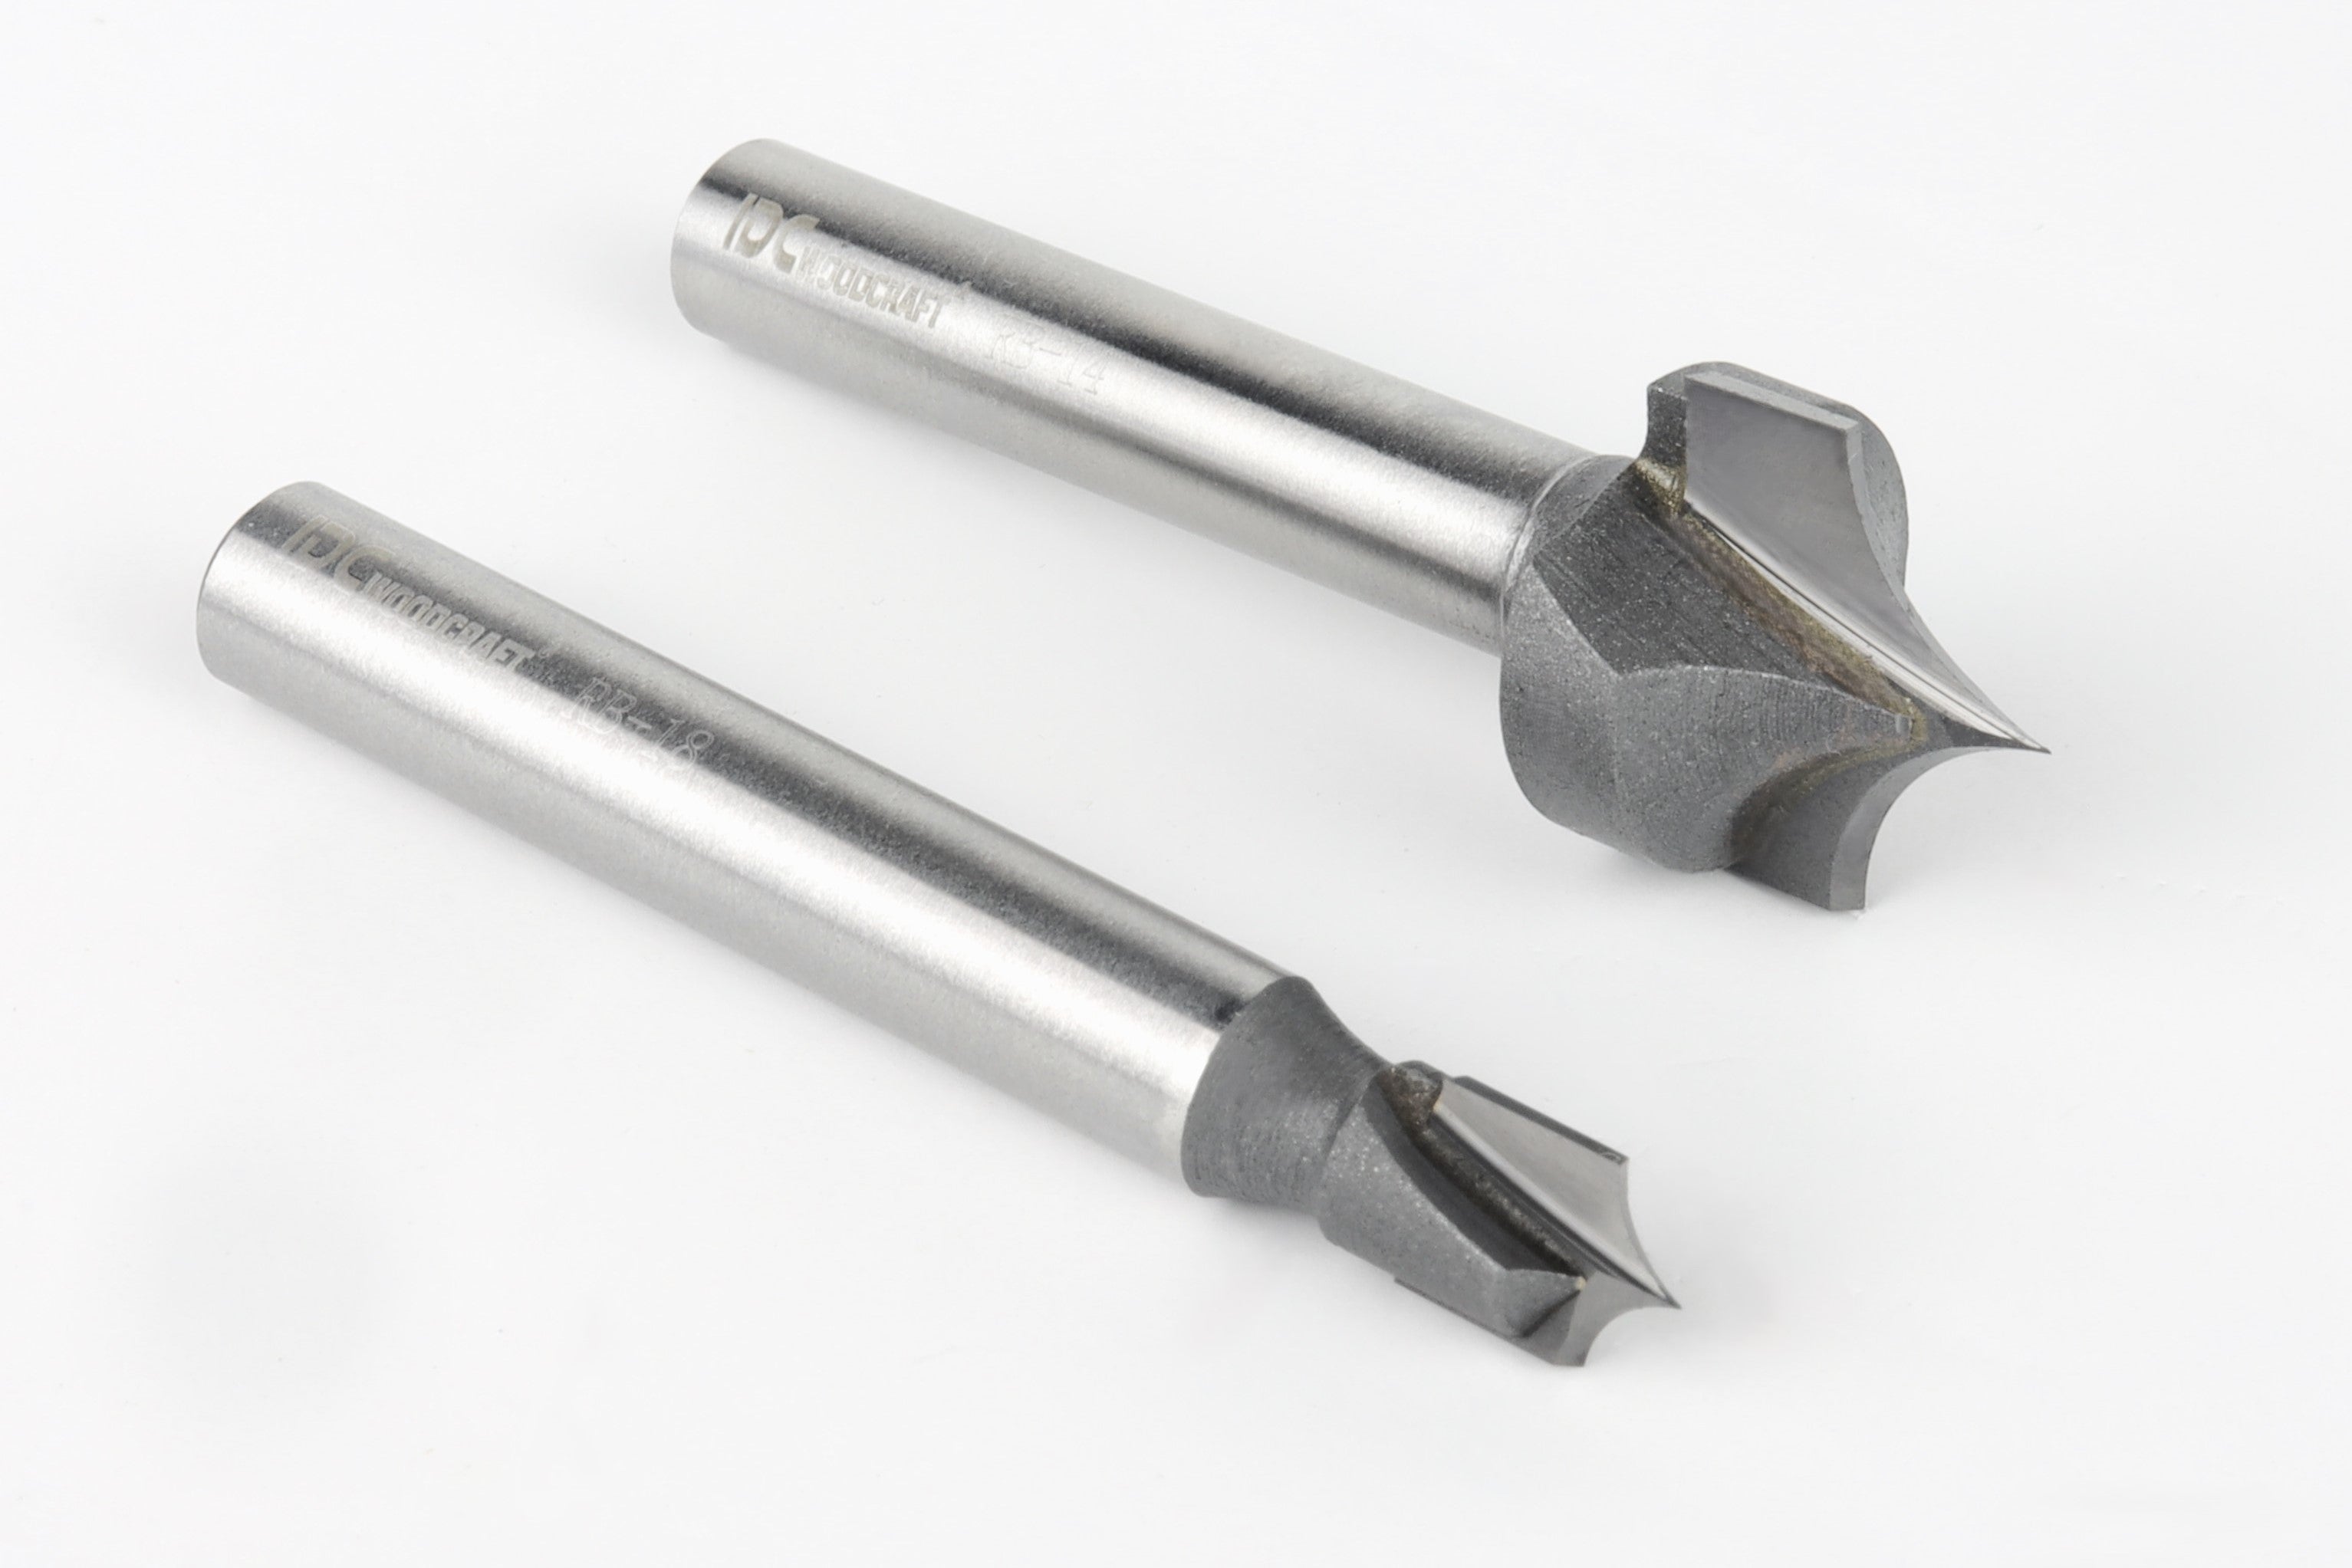 Edge Rounding Bit Set 1/4 & 1/8 Radius Pointed Tip 1/4 Shank For CNC Routers